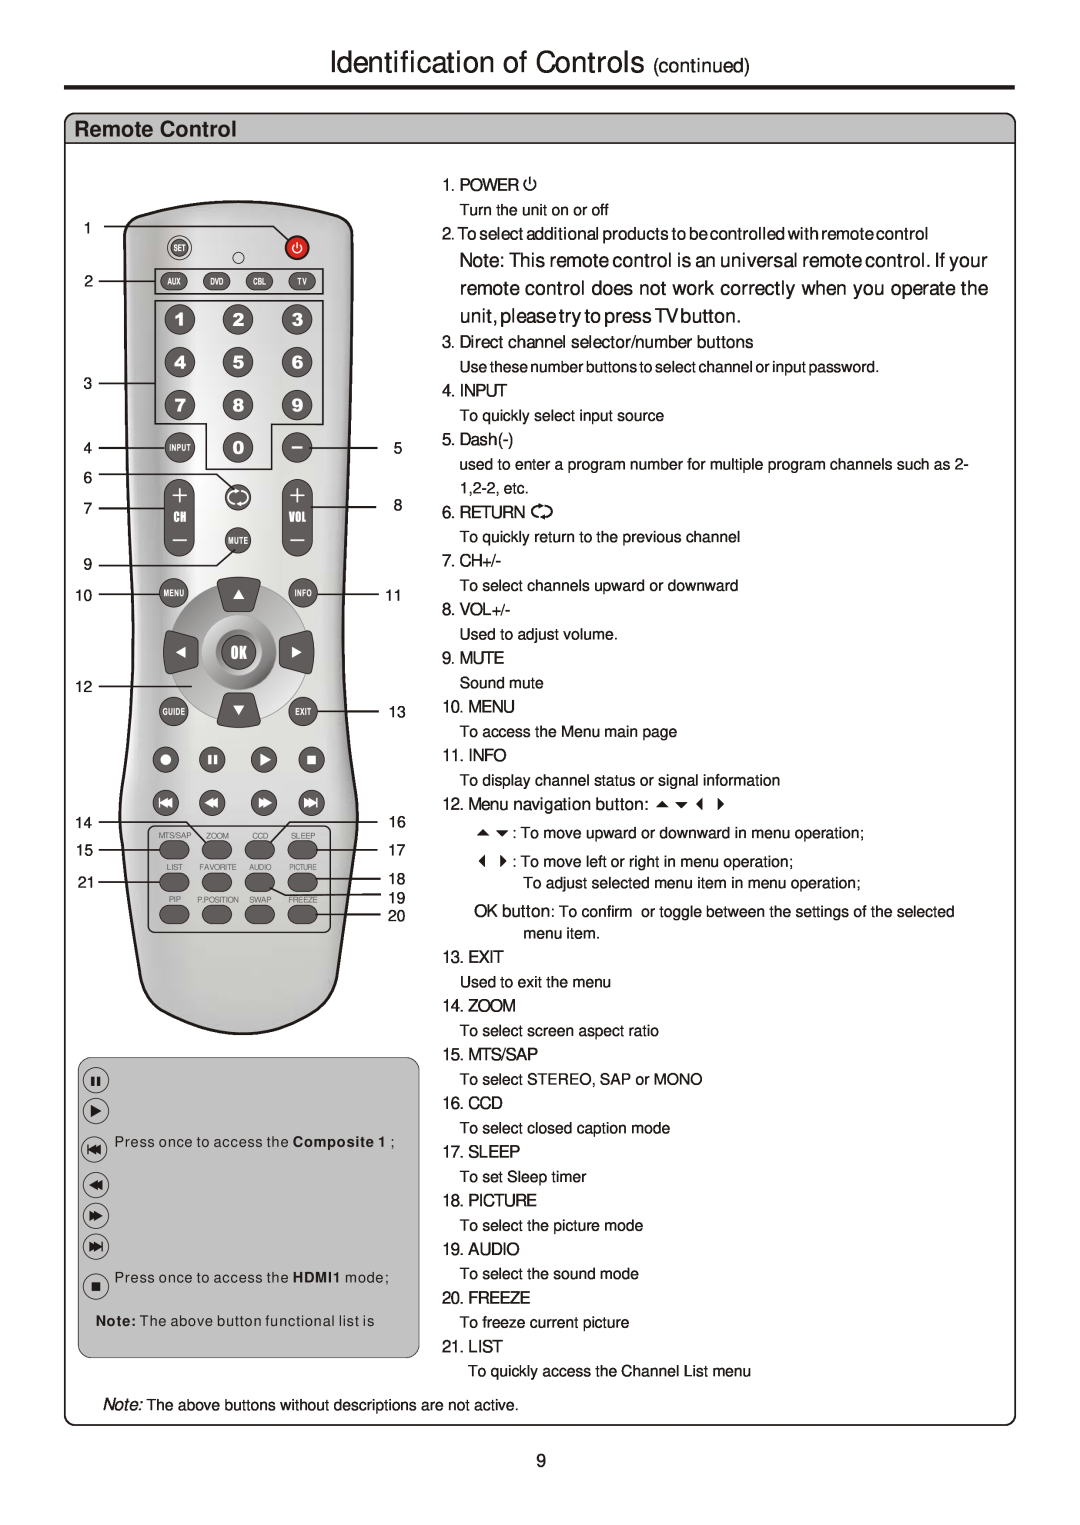 Sanyo 321, AVL-261, 263, 323 Remote Control, unit, please try to press TV button, Identification of Controls continued 